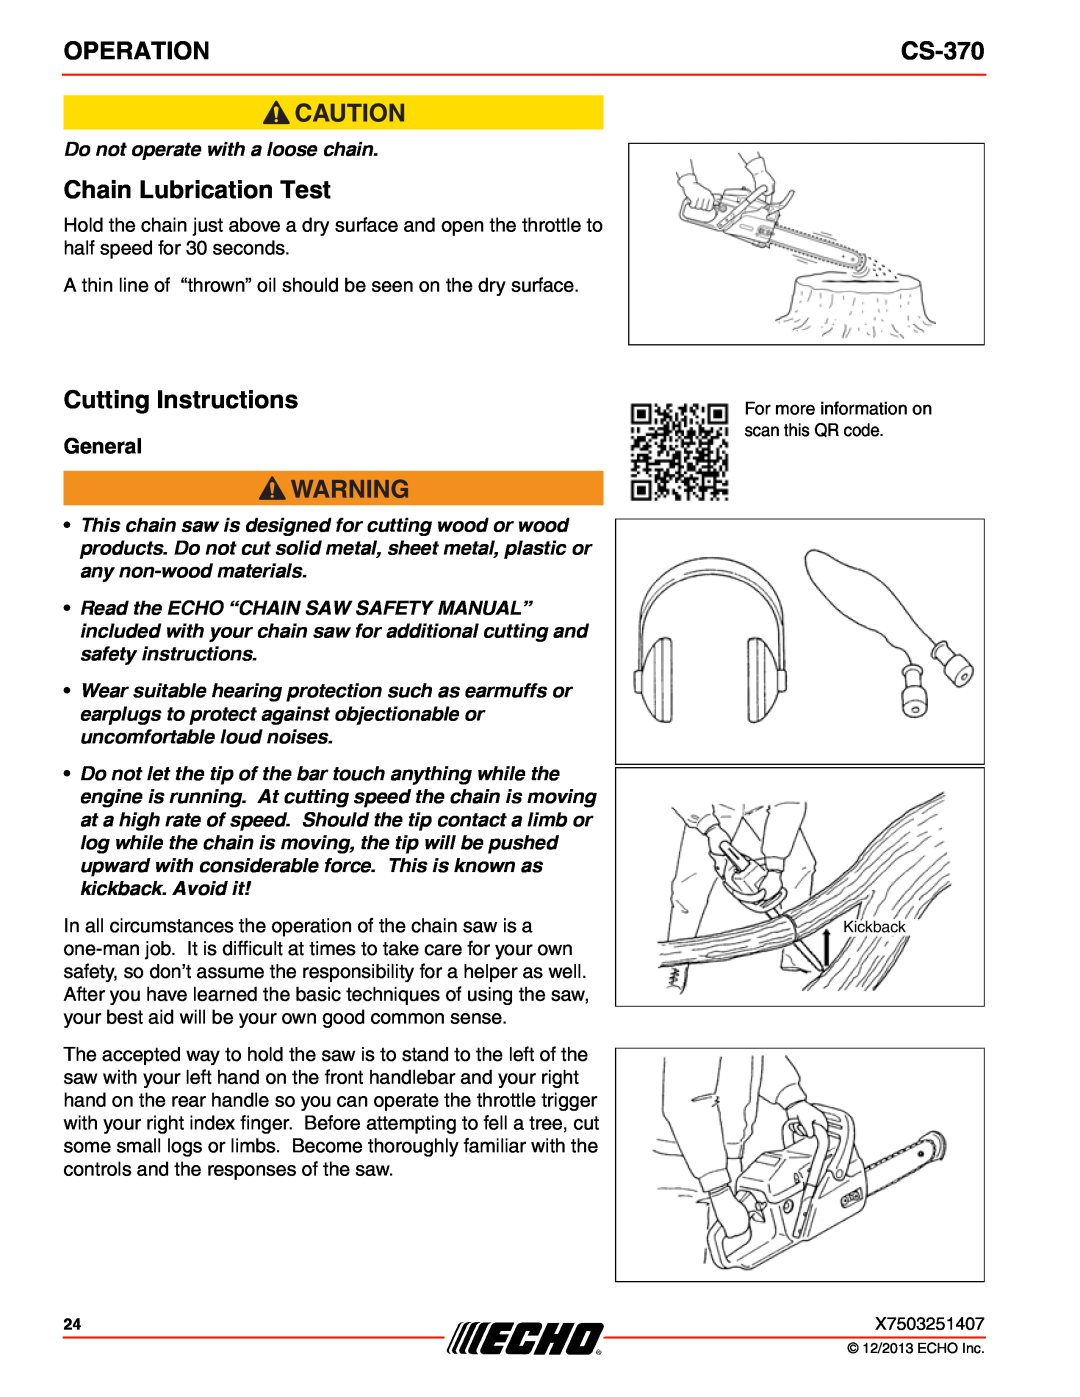 Echo CS-370 instruction manual Chain Lubrication Test, Cutting Instructions, General, Operation 